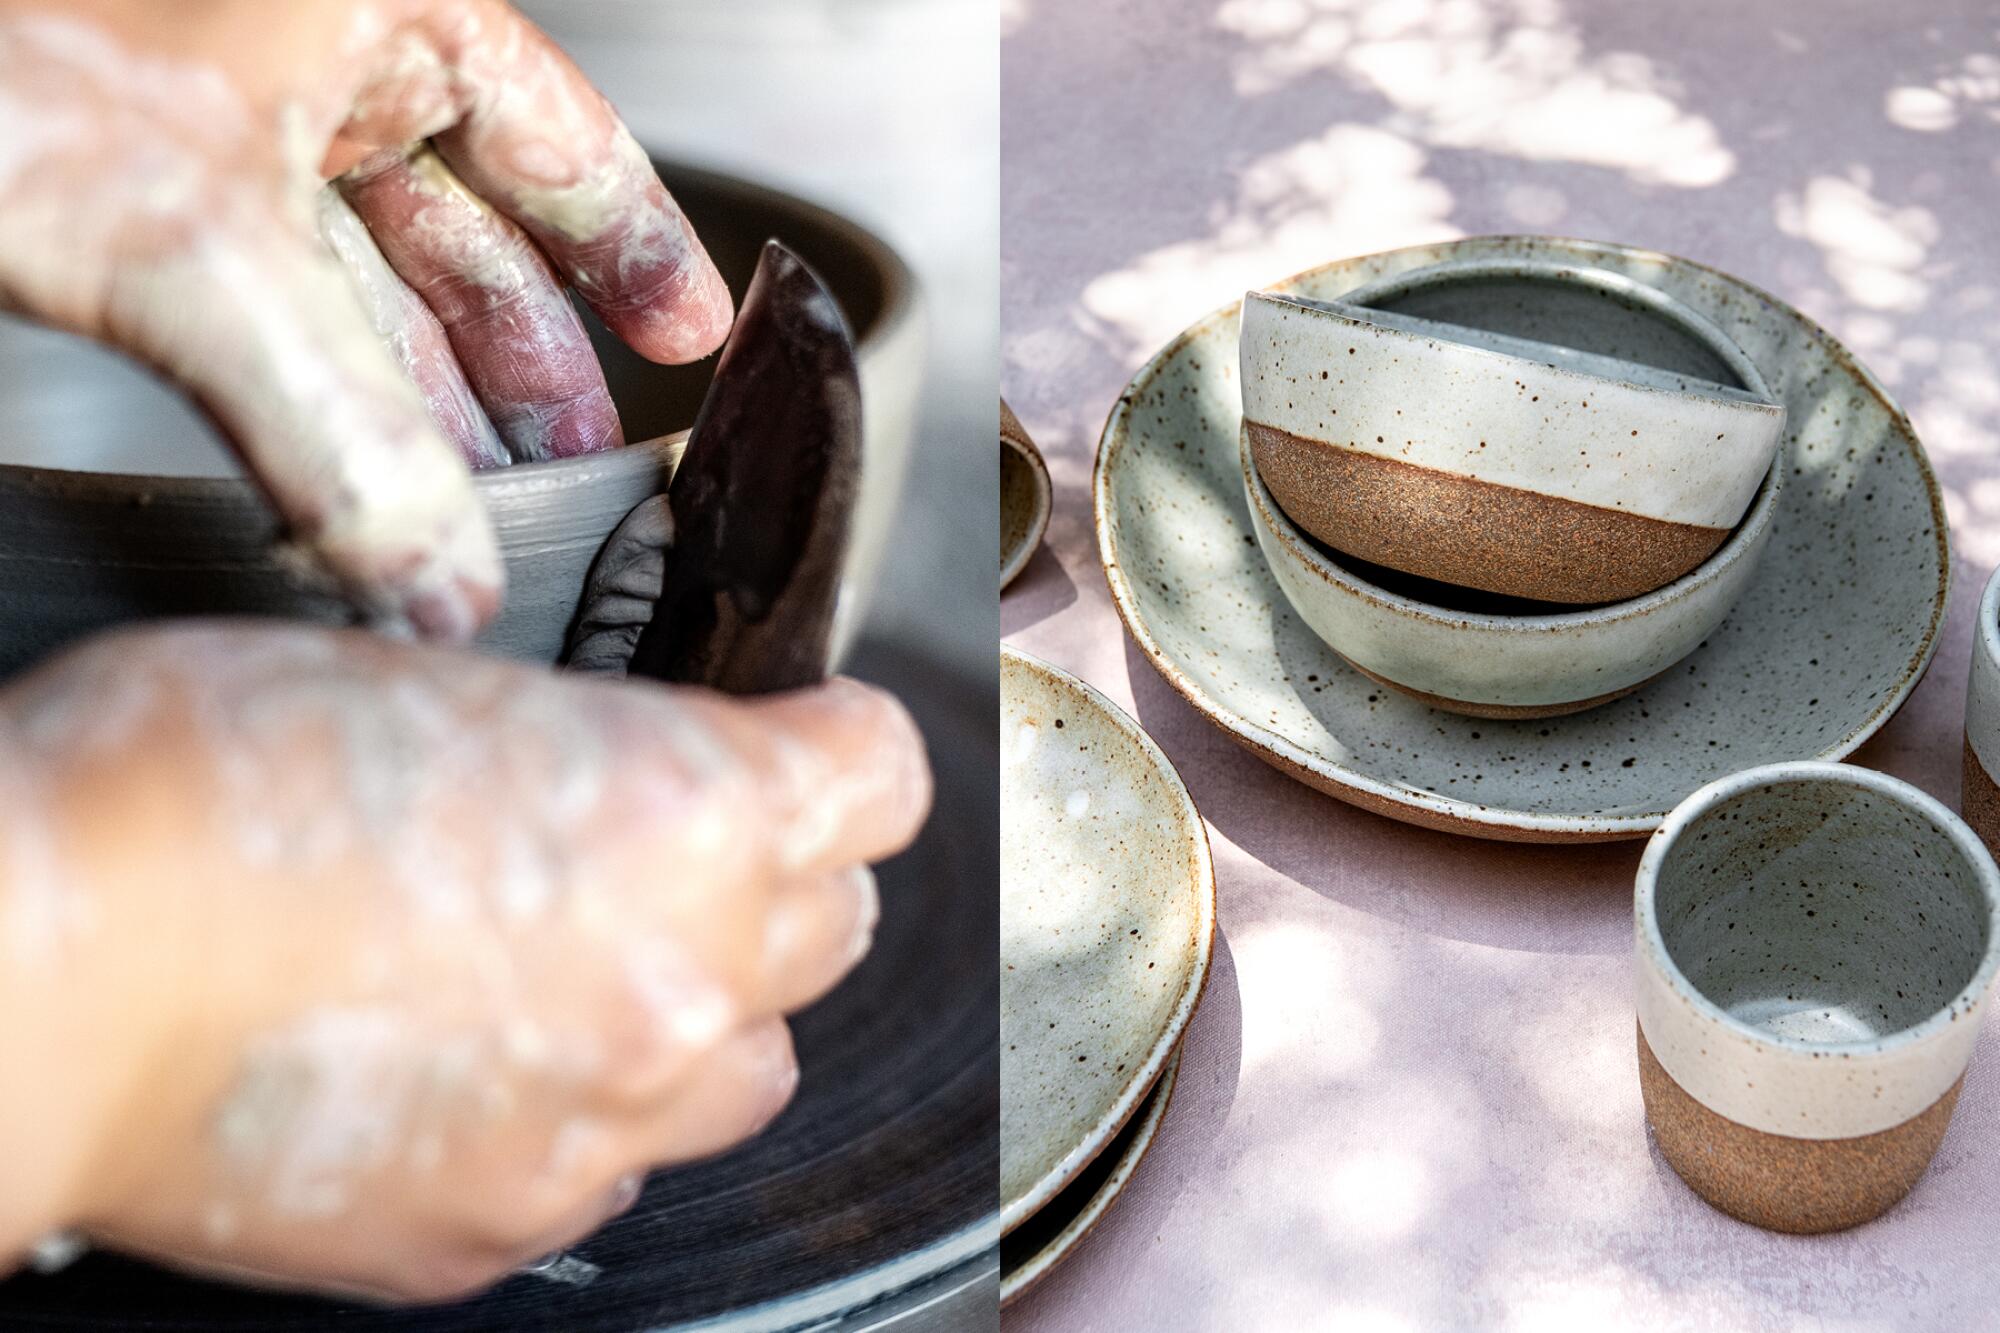 Close-up on a woman's hands shaping a bowl on the left alongside an image of the same finished bowl on the right.